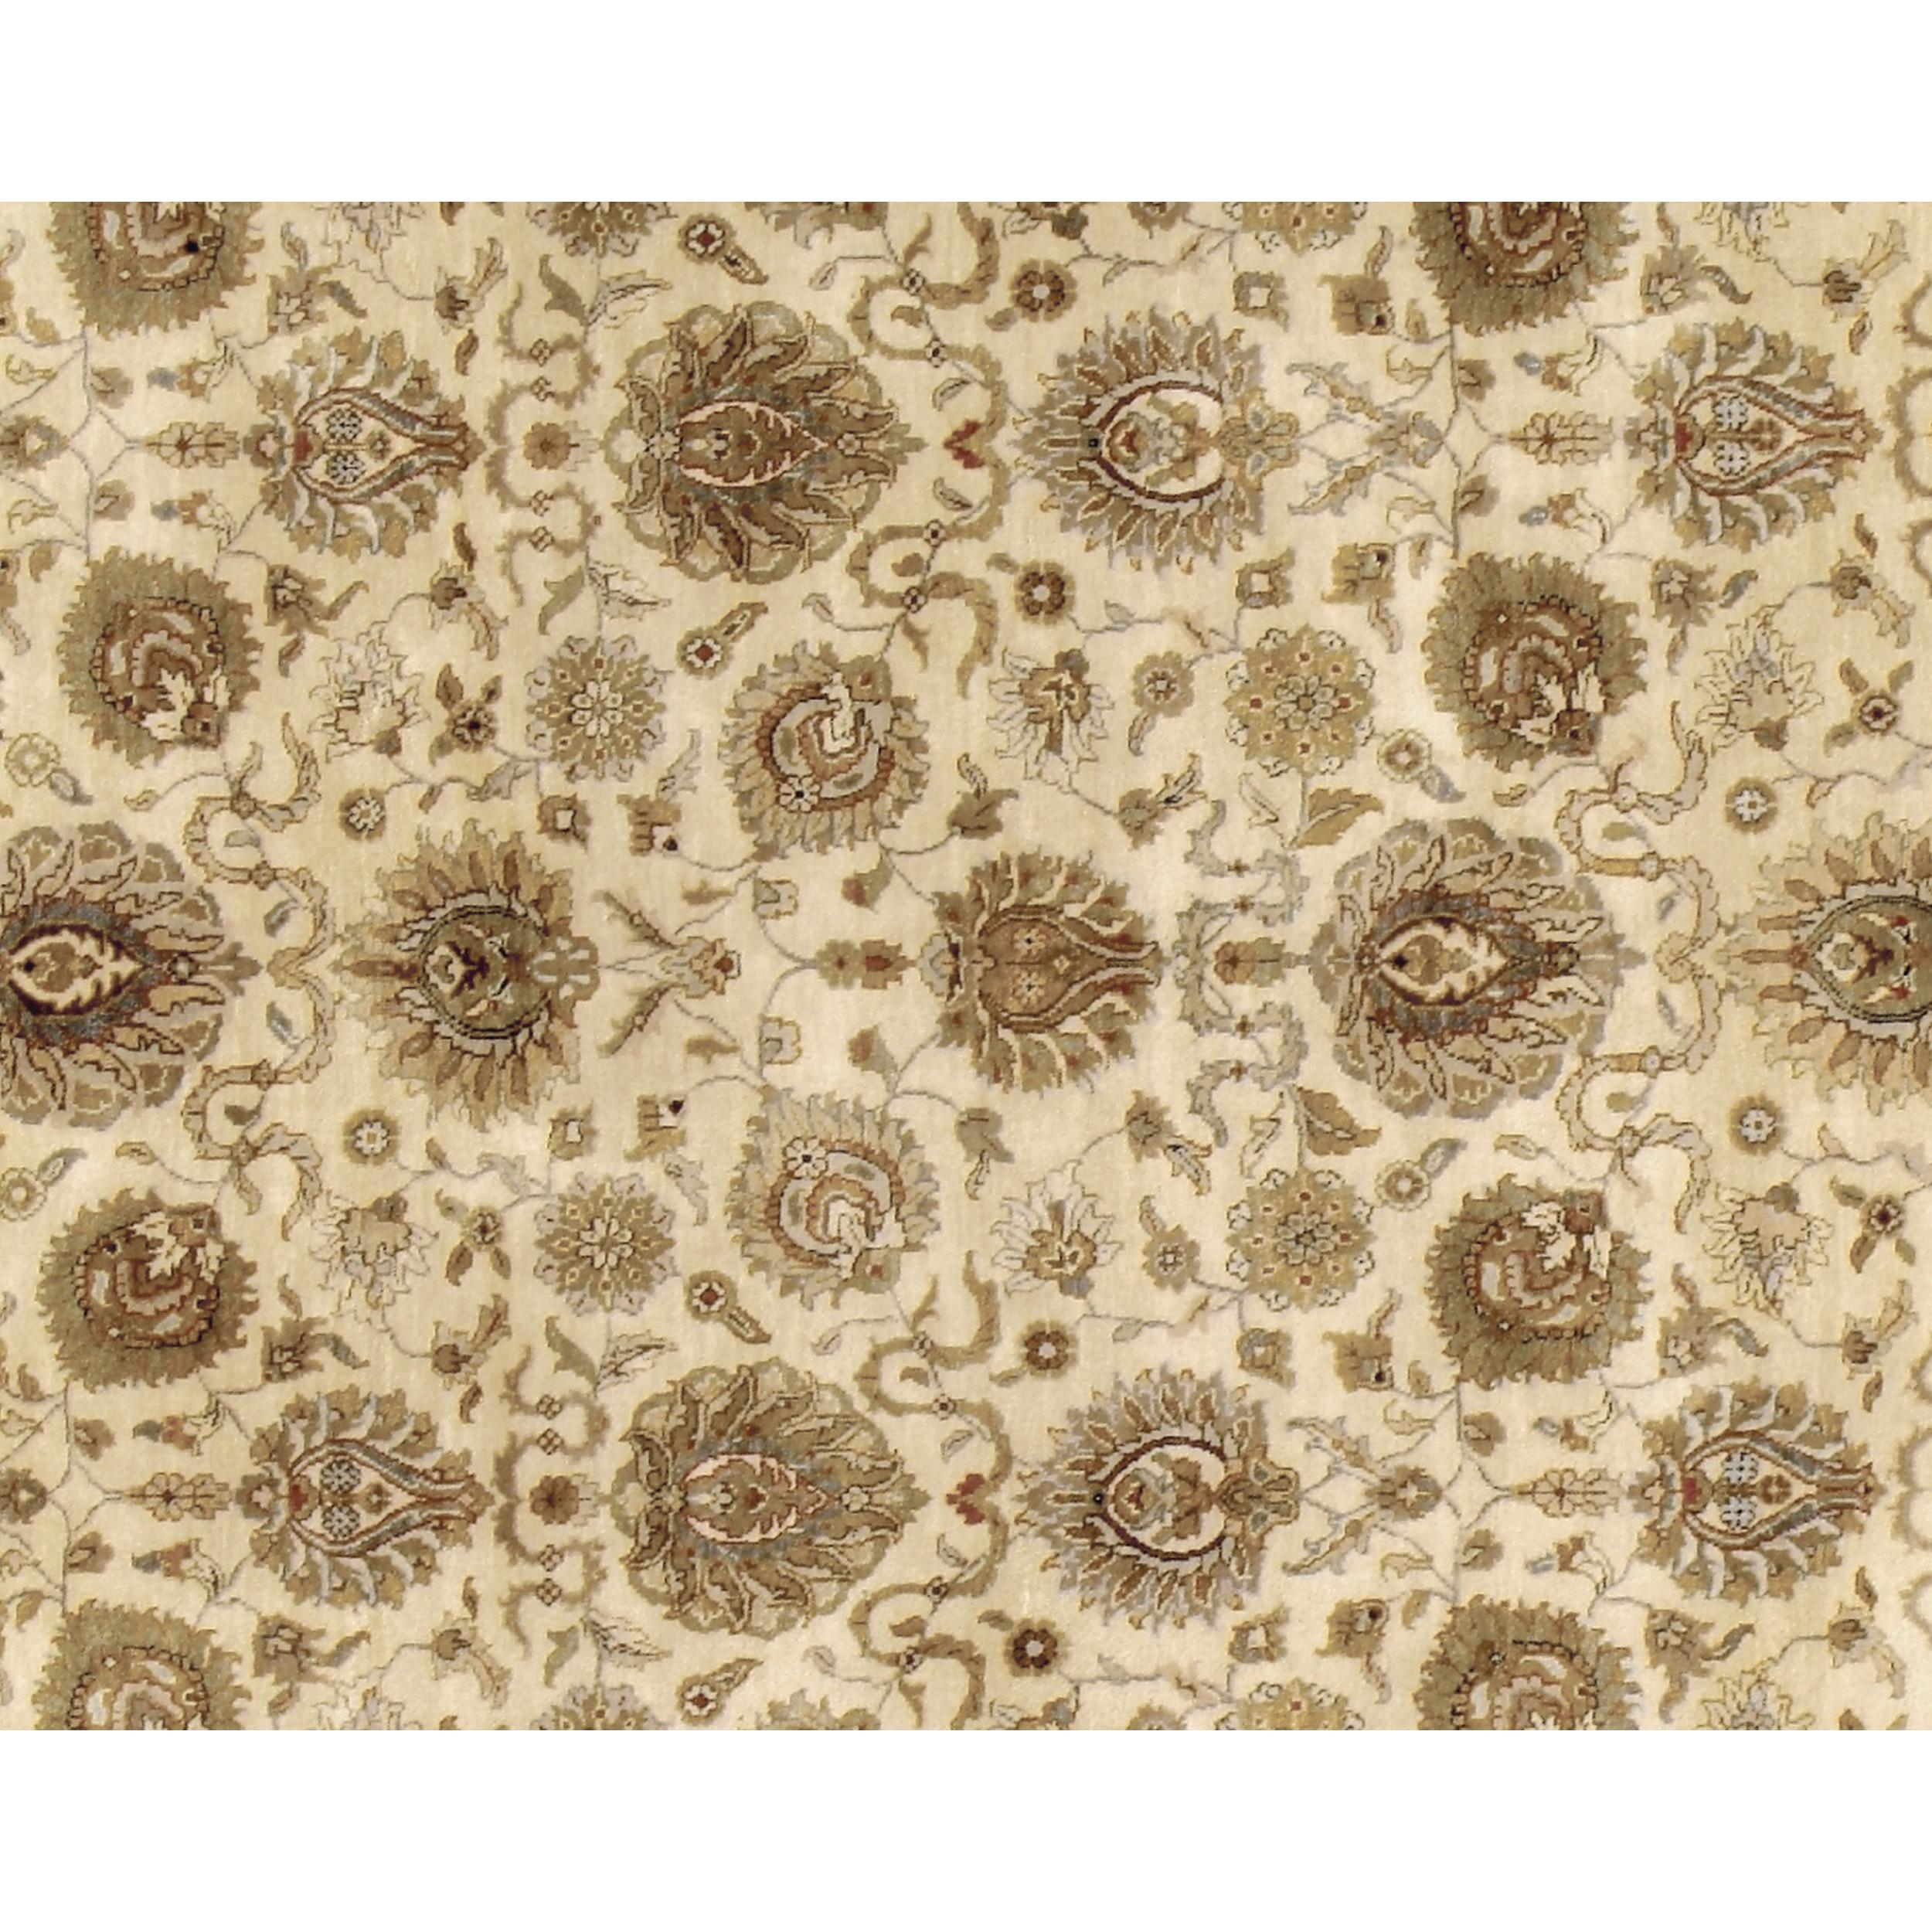 Indian Luxury Traditional Hand-Knotted Sultanabad Cream/Brown 12X18 Rug For Sale